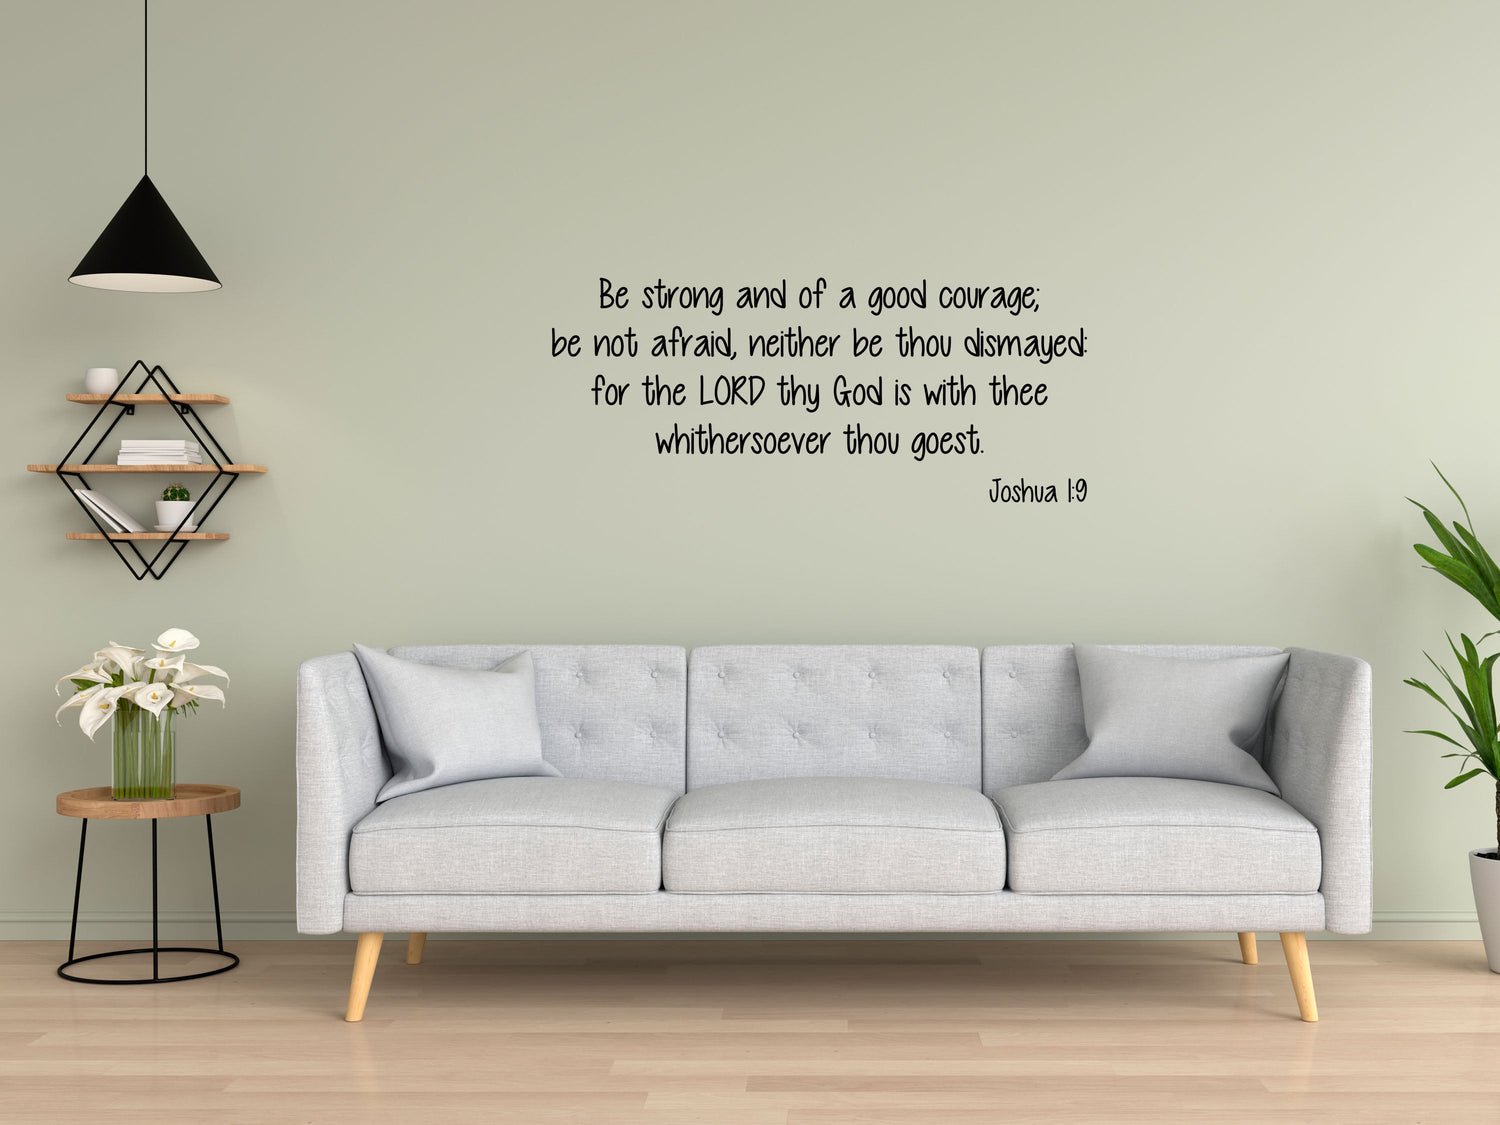 Joshua 1:9 - Bible Wall Quote Sticker Vinyl Wall Decal Inspirational Wall Signs 